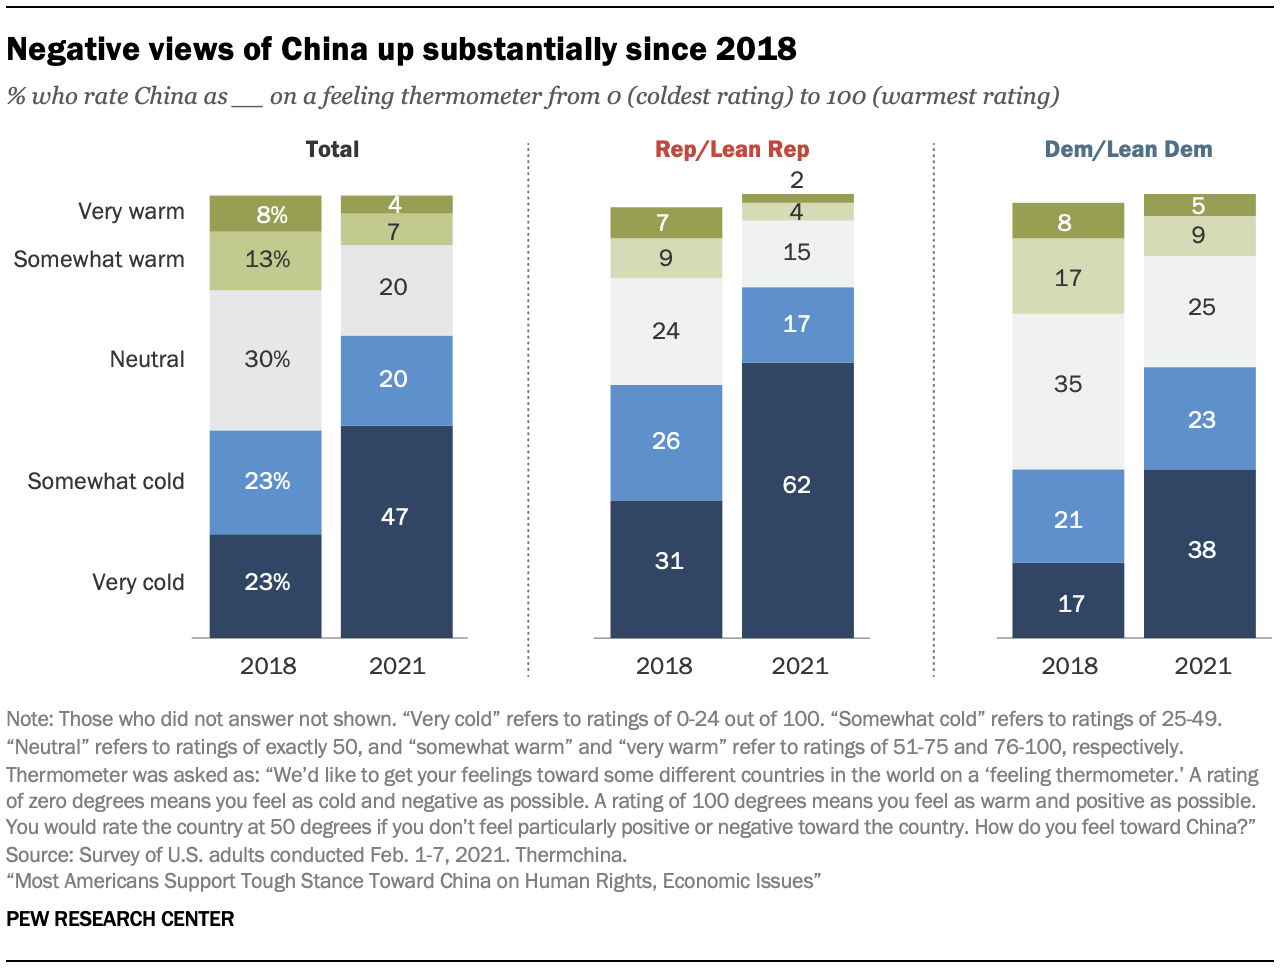 Negative views of China up substantially since 2018